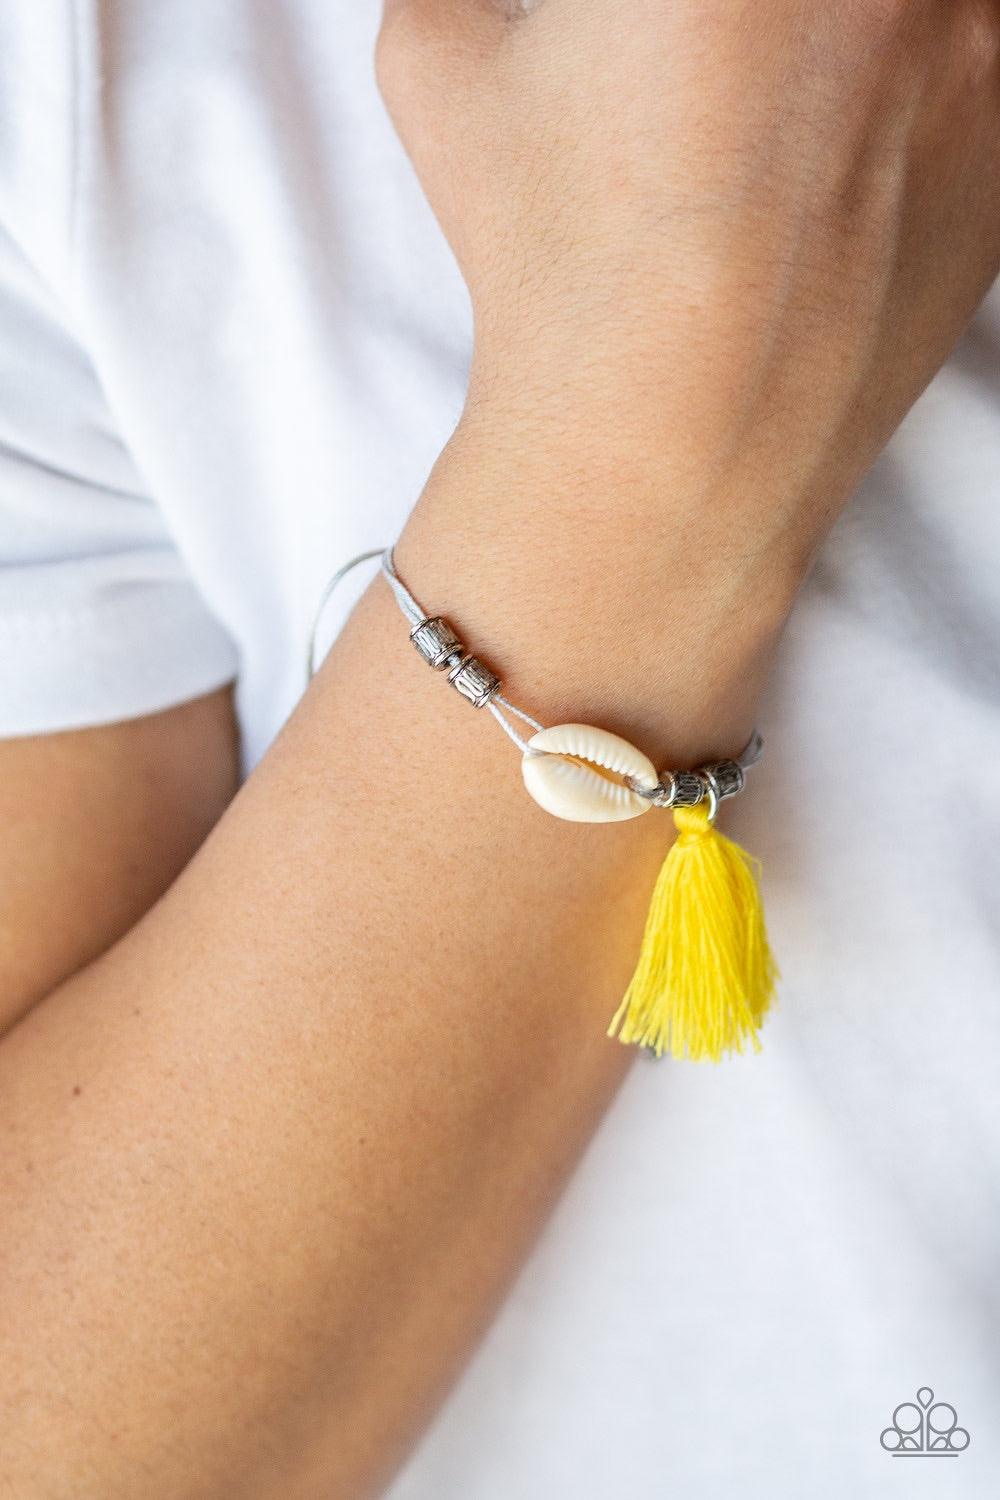 Paparazzi Accessories SEA If I Care - Yellow Infused with antiqued silver beads, a yellow threaded tassel and dainty white seashell slide along strips of shiny gray cording around the wrist for a summery look. Features an adjustable sliding knot closure.